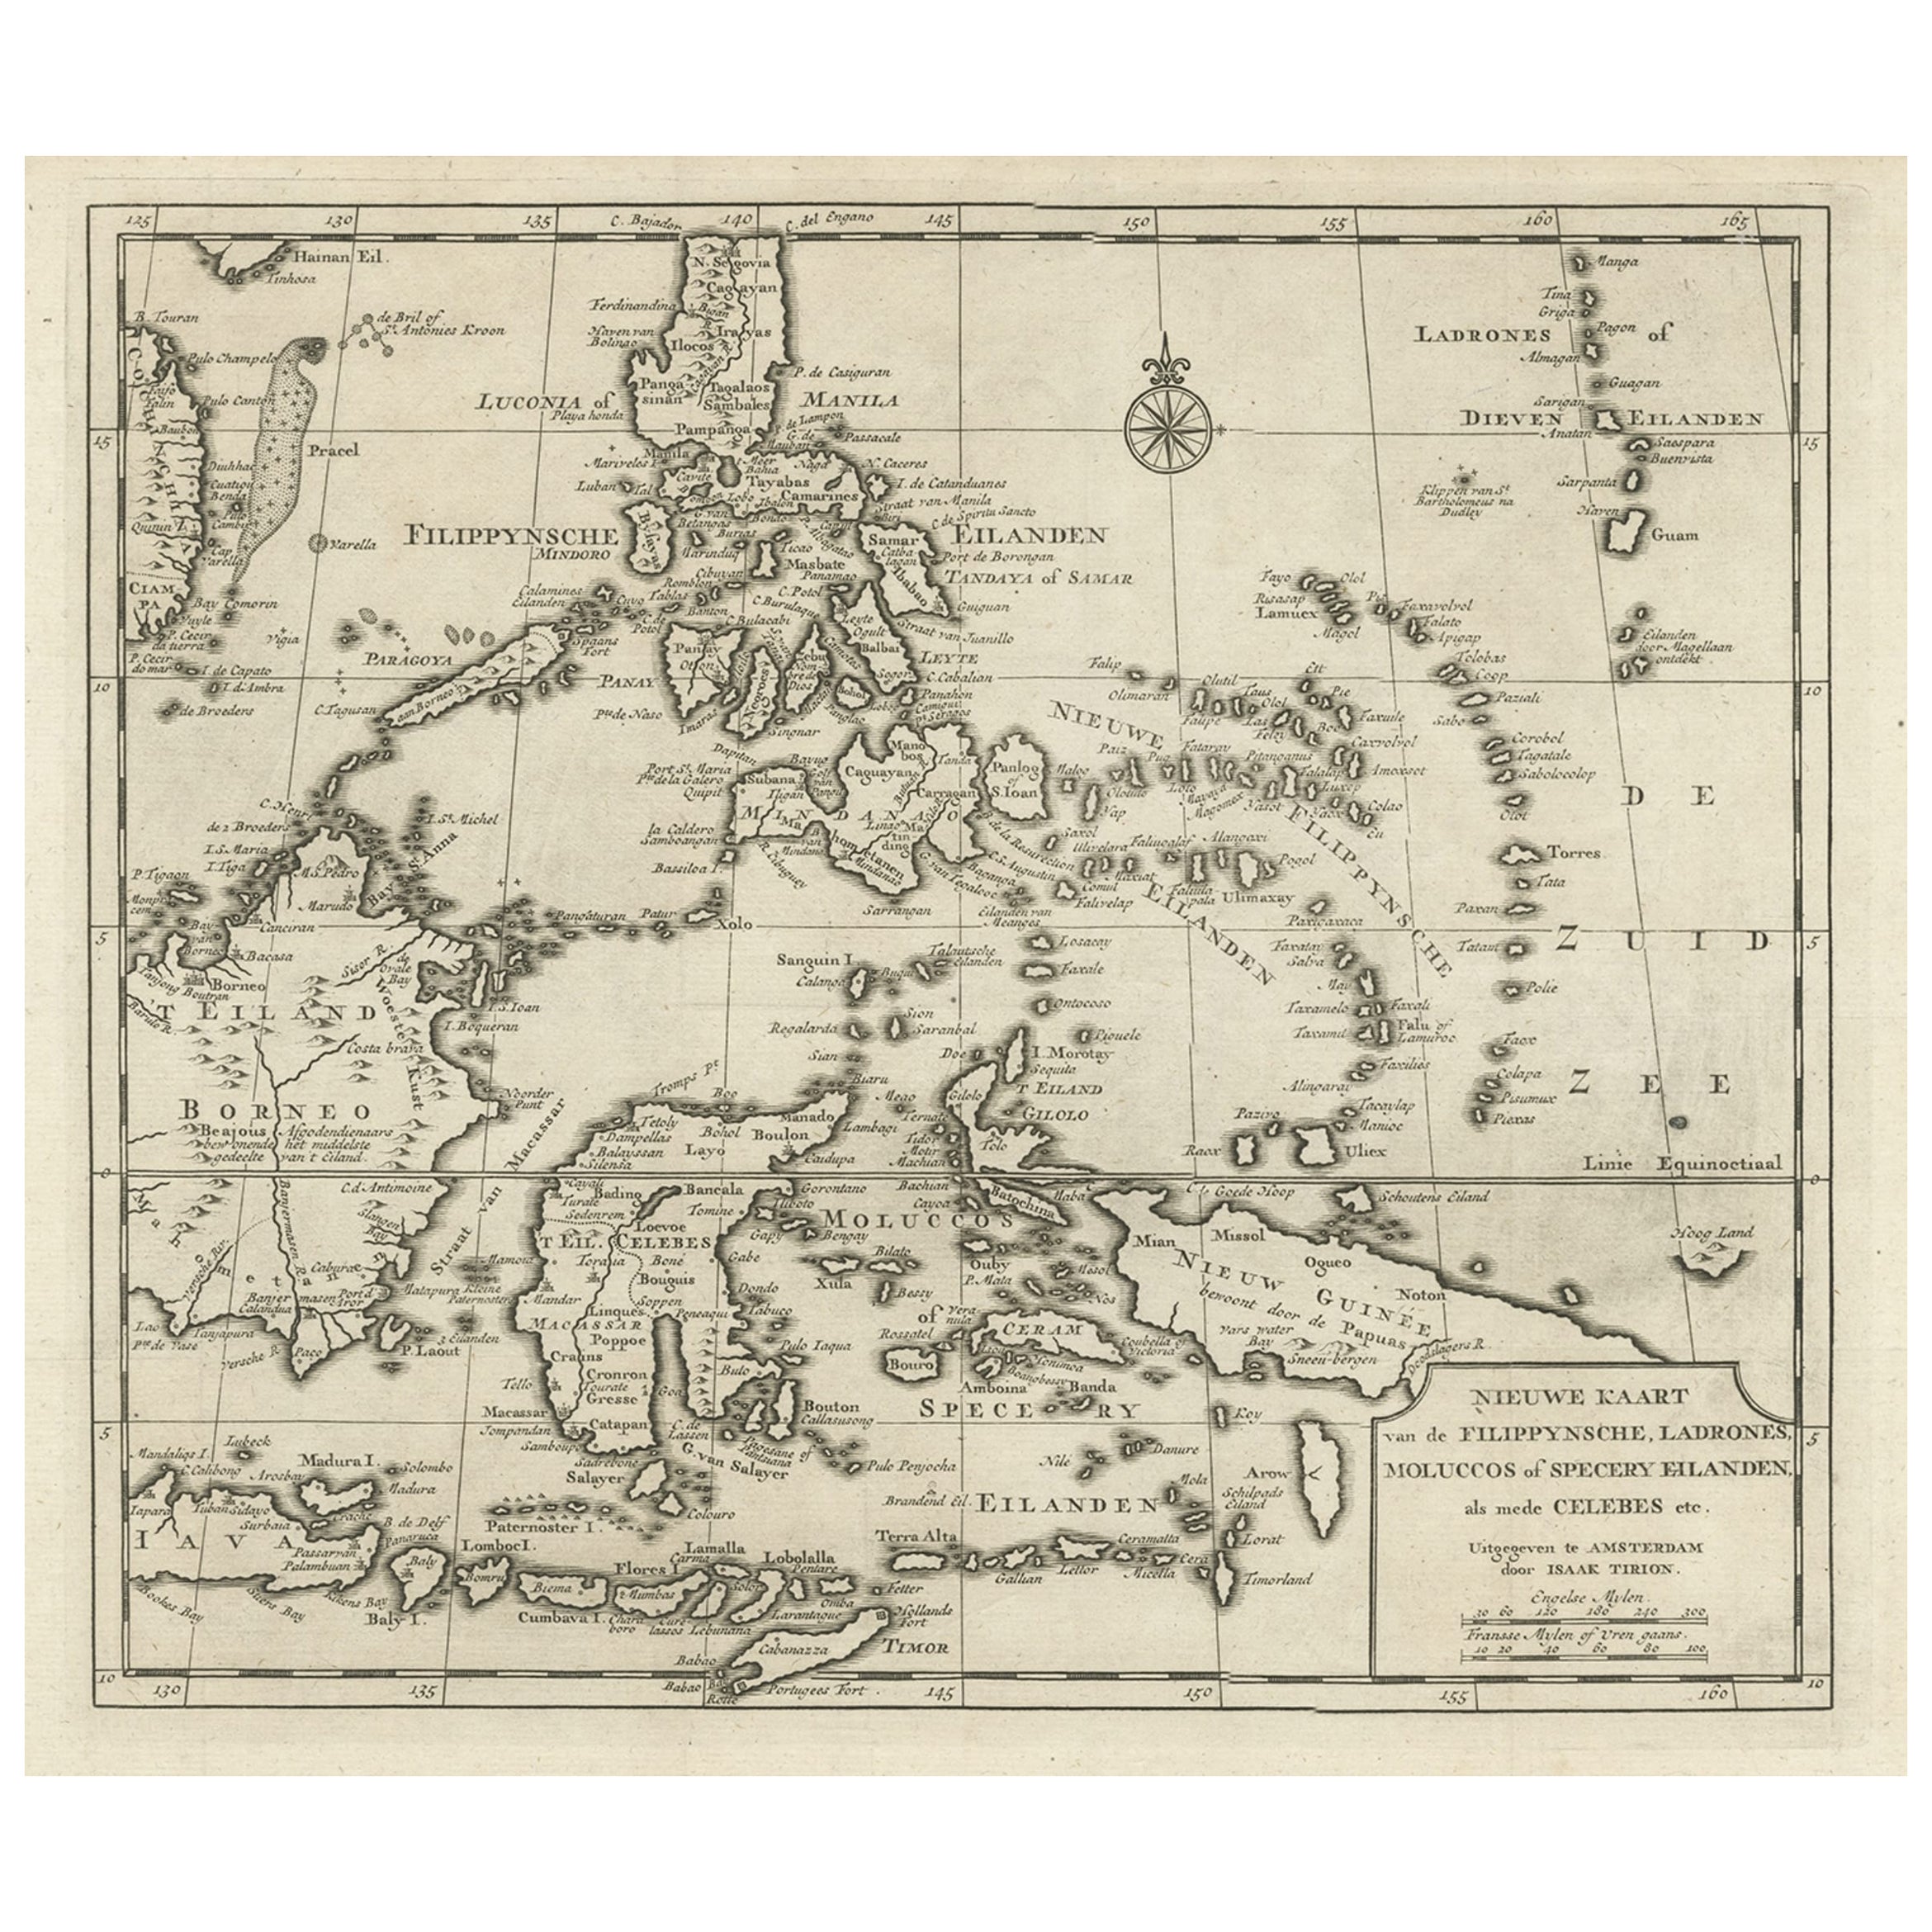 Old Map of the Philippines and Part of Indonesia 'Spice Islands', 1744